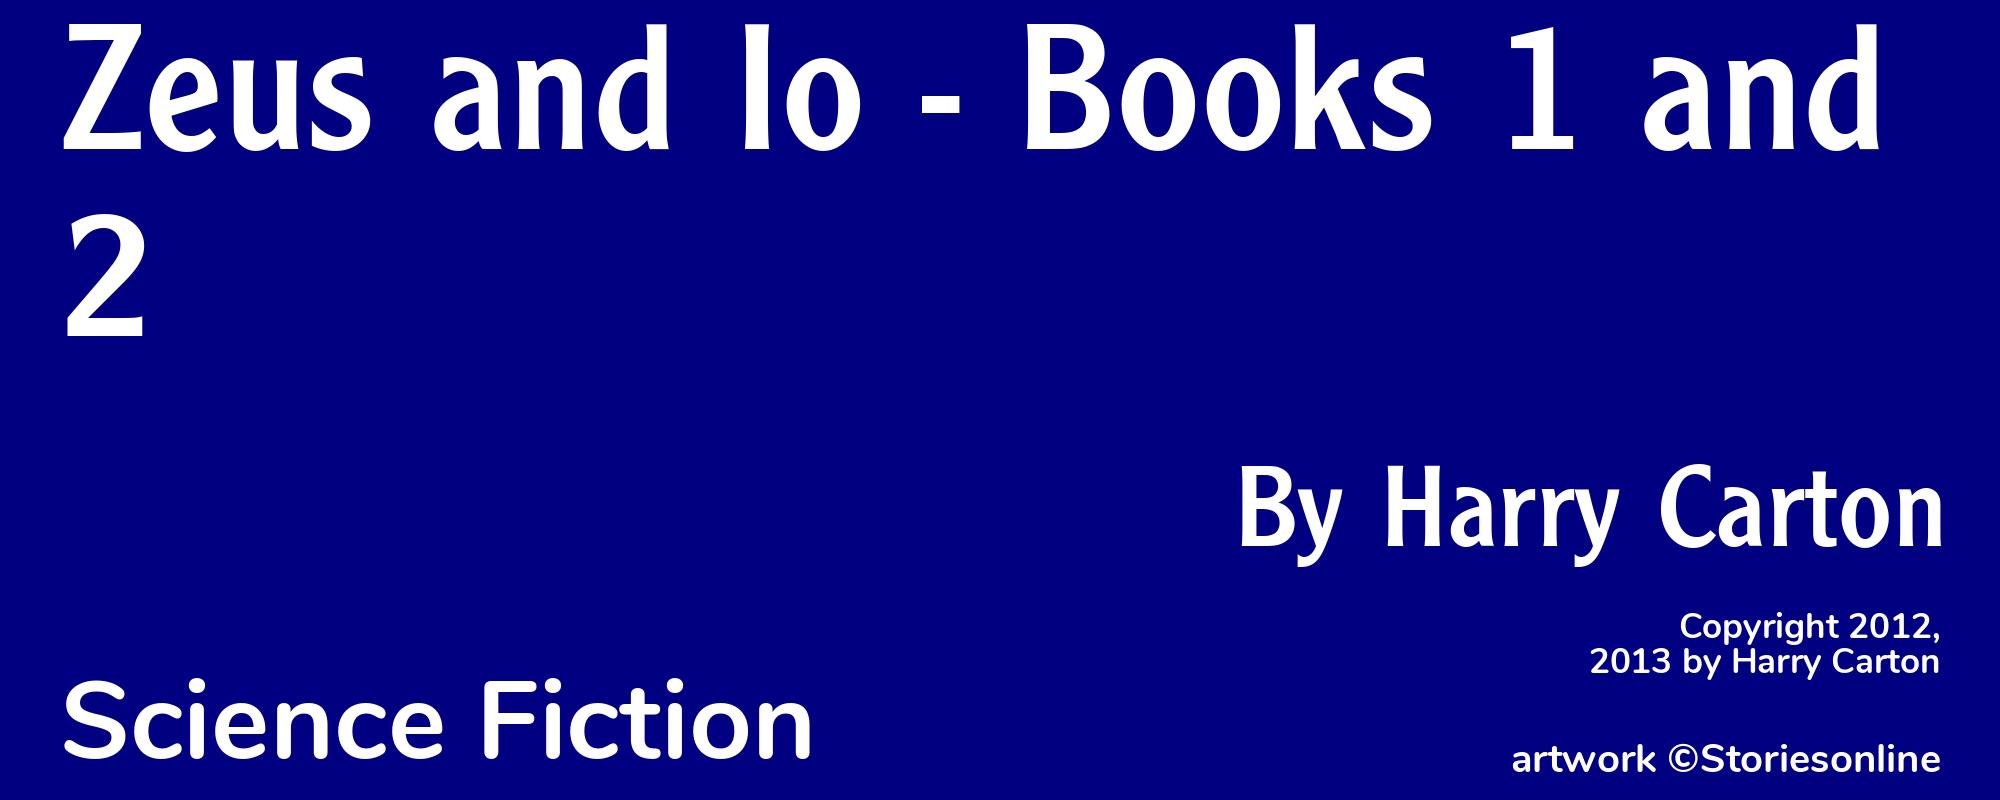 Zeus and Io - Books 1 and 2 - Cover